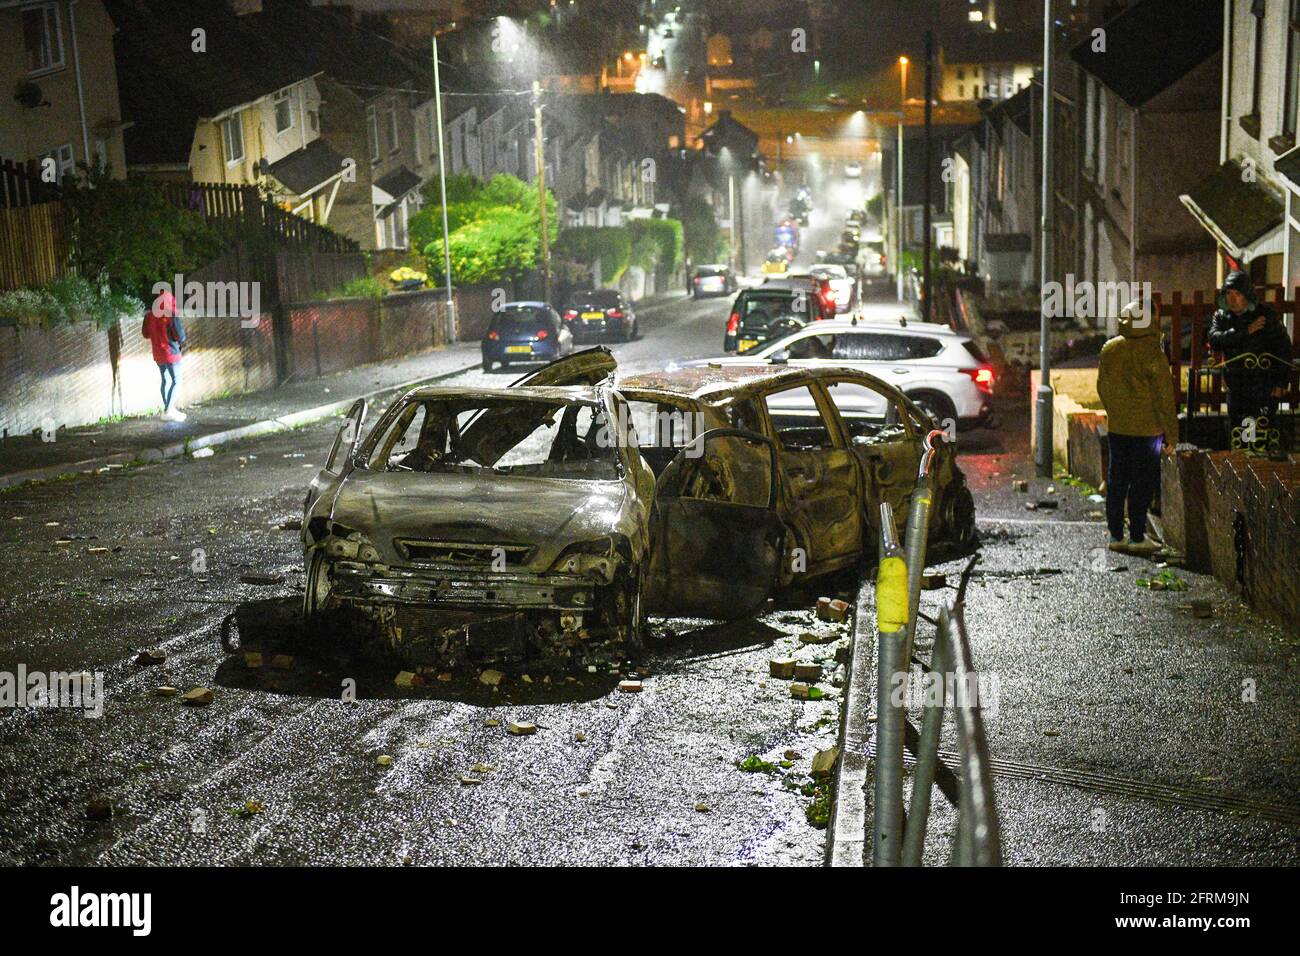 The aftermath of a riot in the Mayhill area of Swansea, which saw police attacked and several cars in the area torched during large scale disorder on the council estate. It is believed locals reacted when police turned up to a memorial that was taking place for a local man who had recently died. Stock Photo